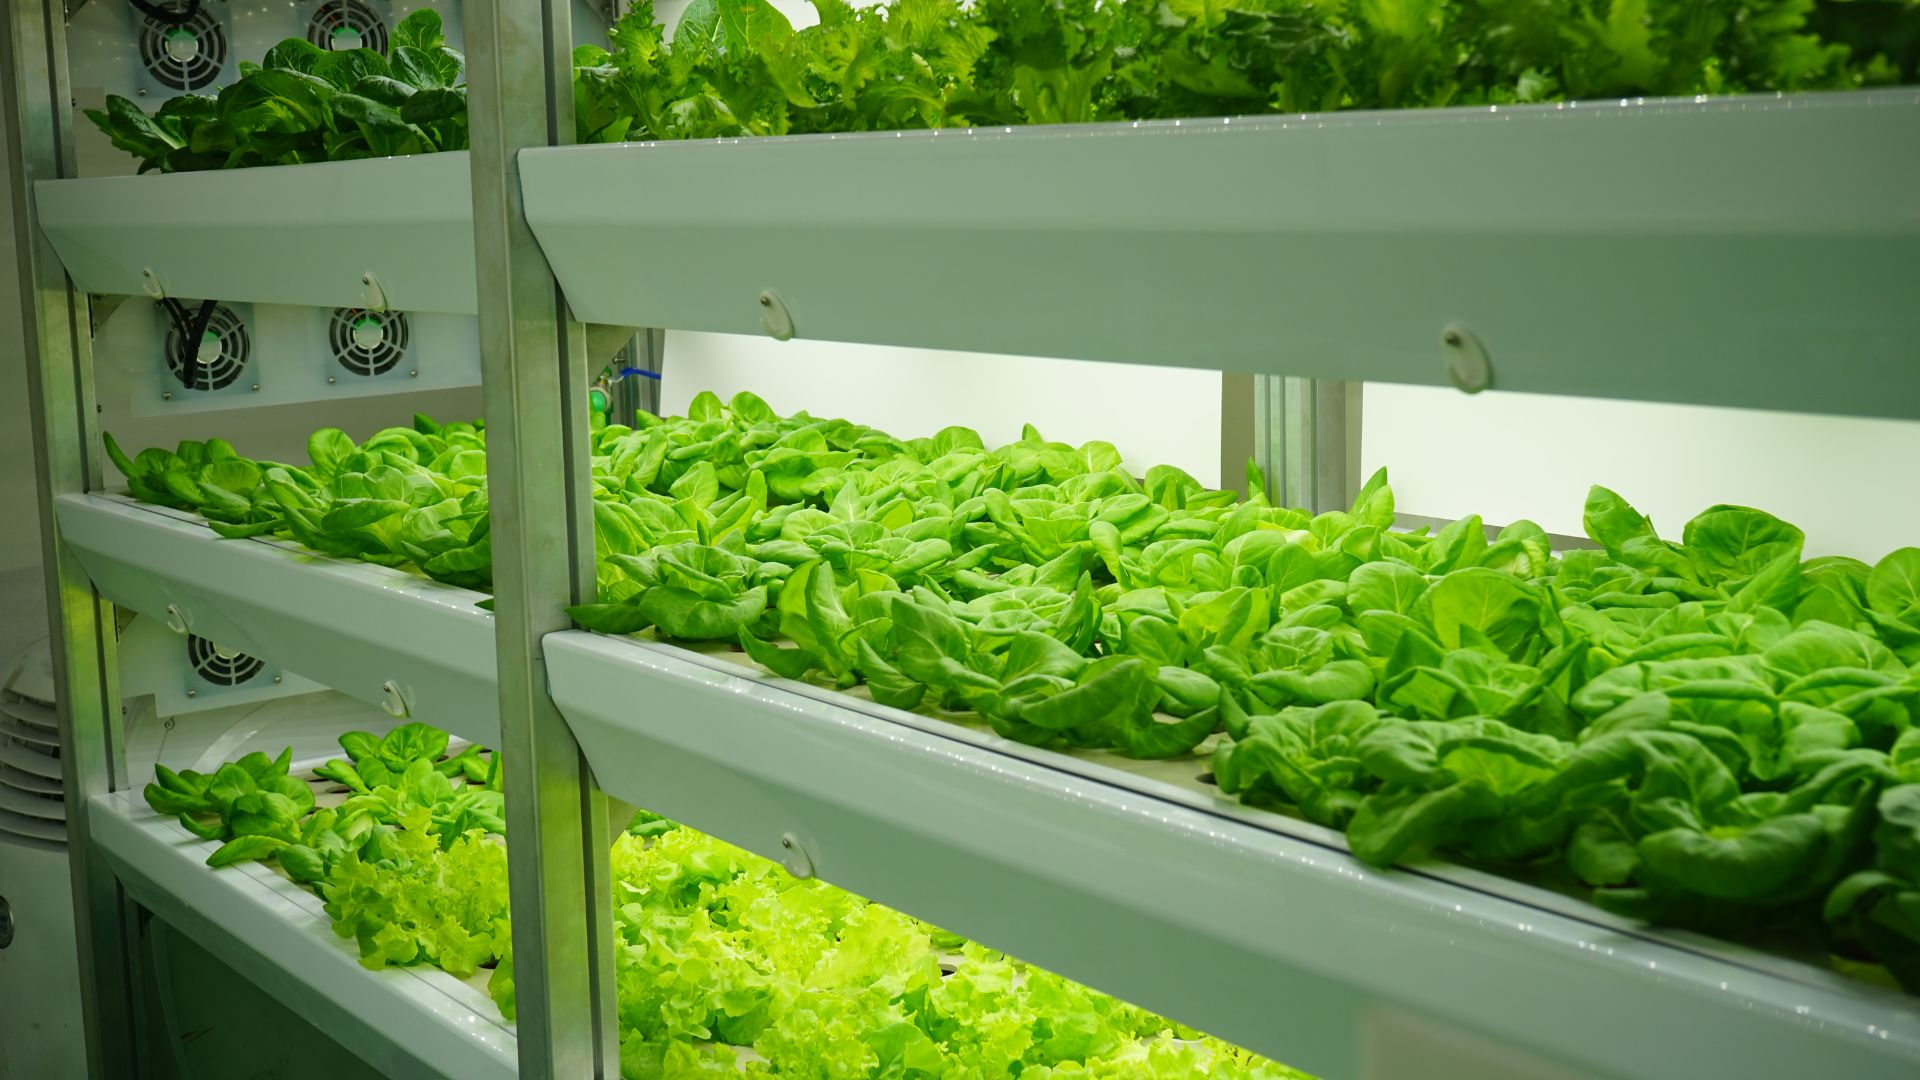 Photo of lettuce growing in vertical hydroponics.